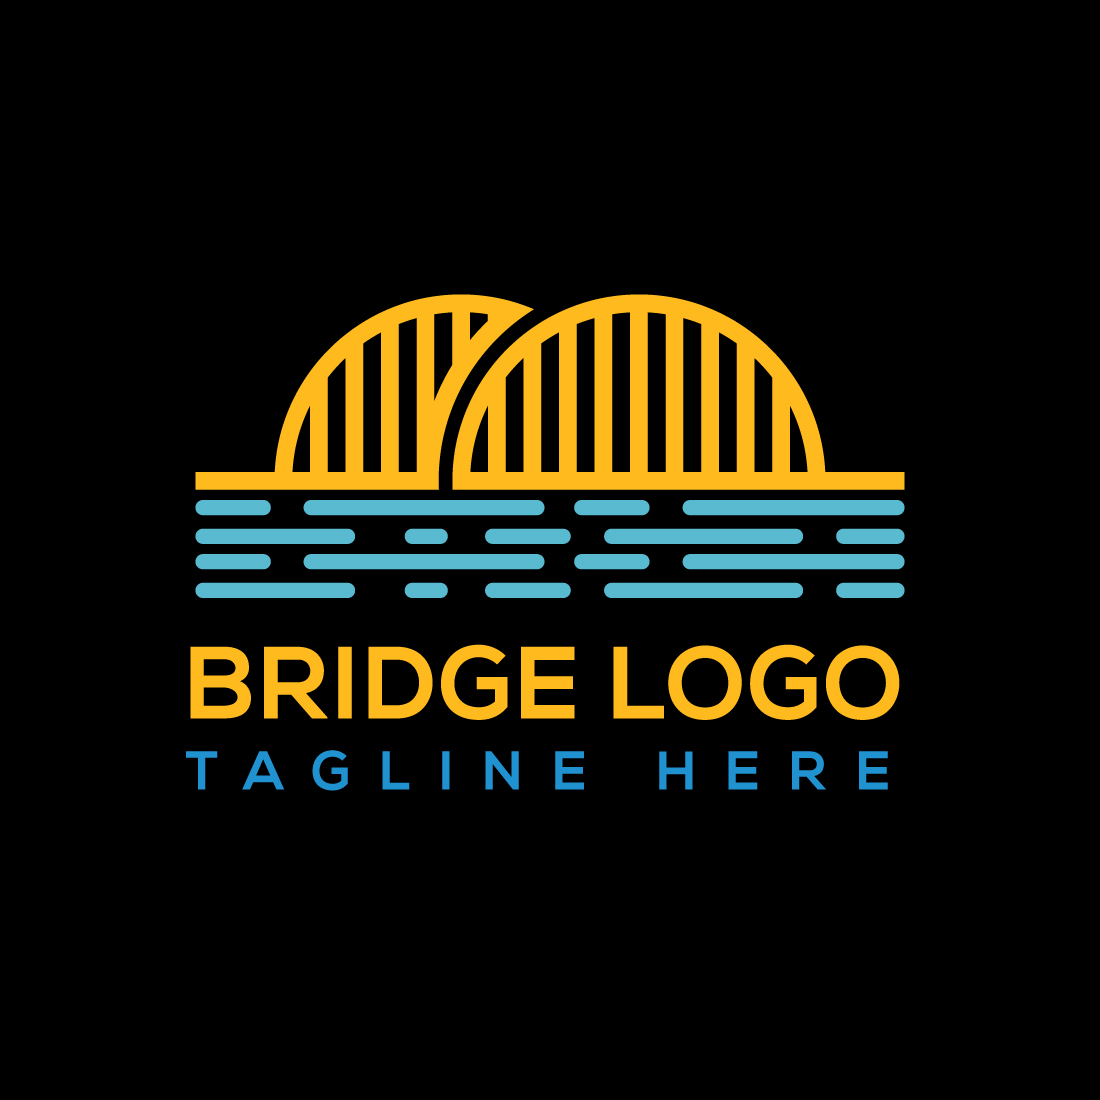 Bridge Logo Template for Company Identity with black background.